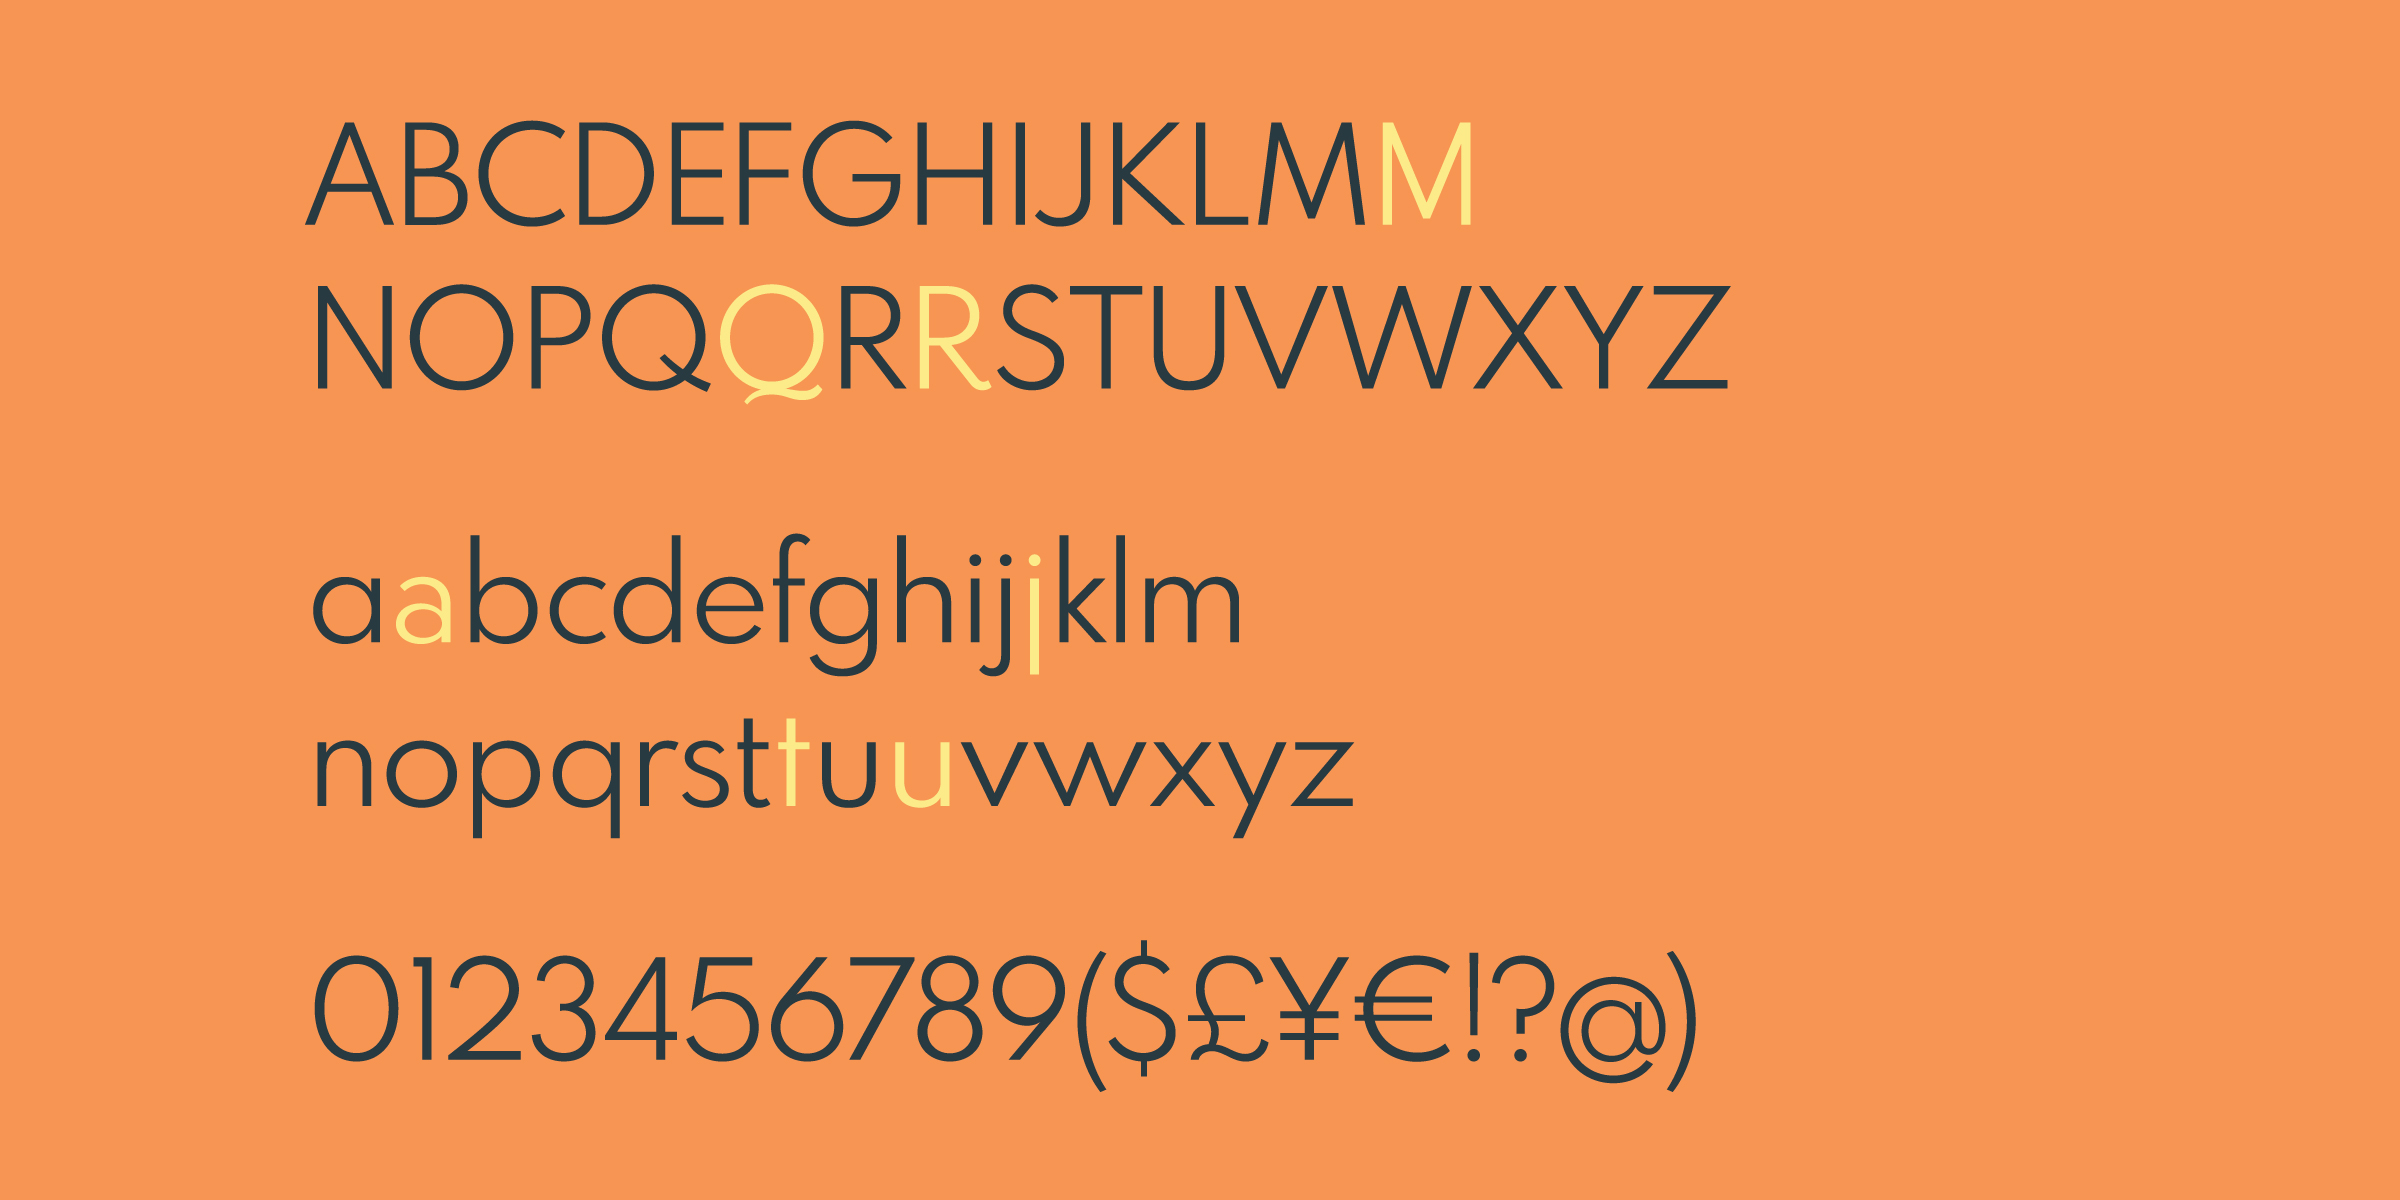 Spartan® Font Download Download the Spartan® Font Today